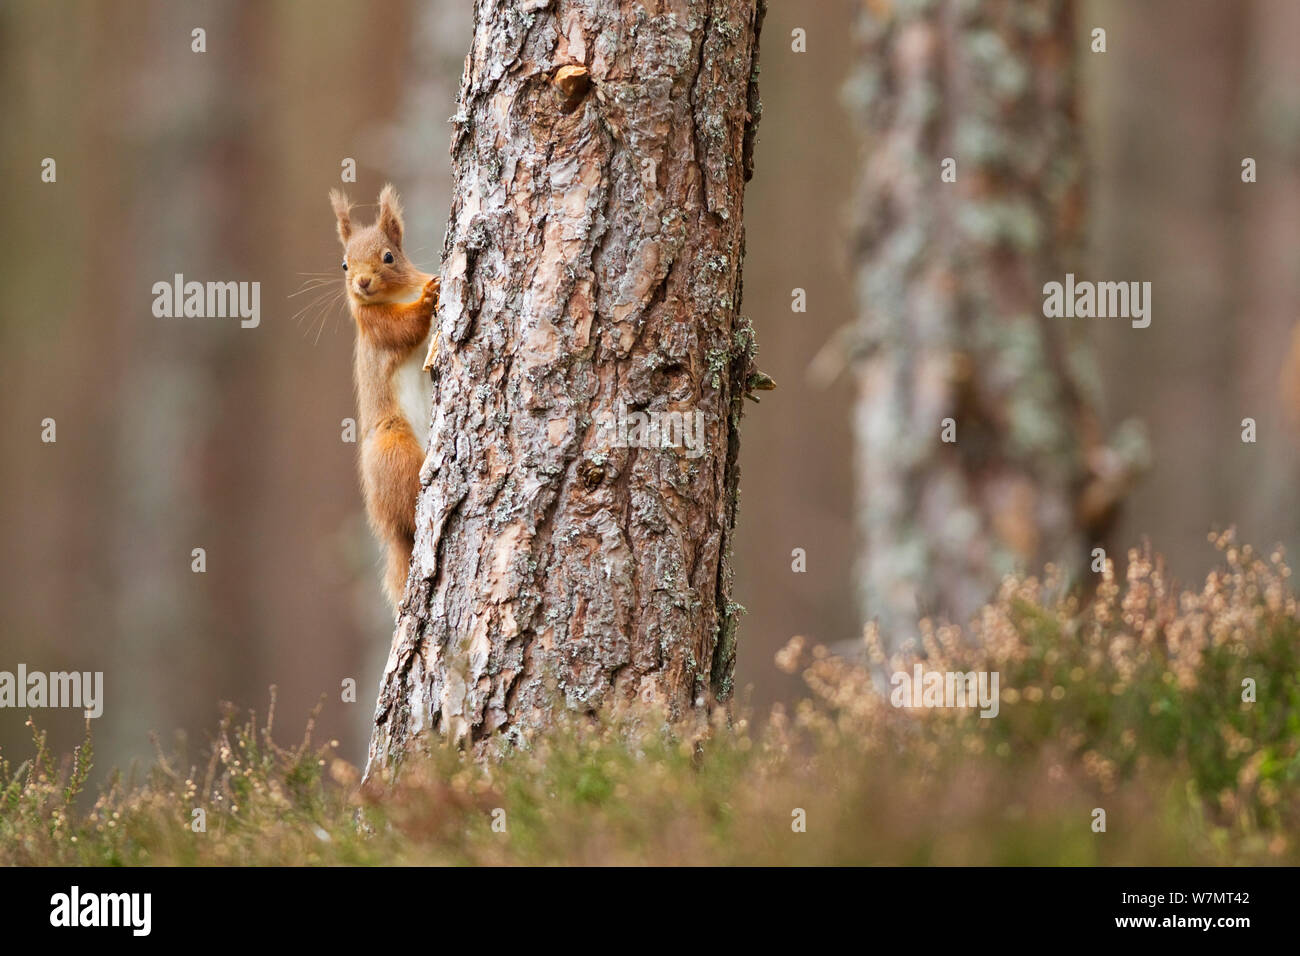 Red squirrel (Sciurus vulgaris) slimbing tree in scots pine forest, Cairngorms National Park, Scotland, March 2012. Stock Photo